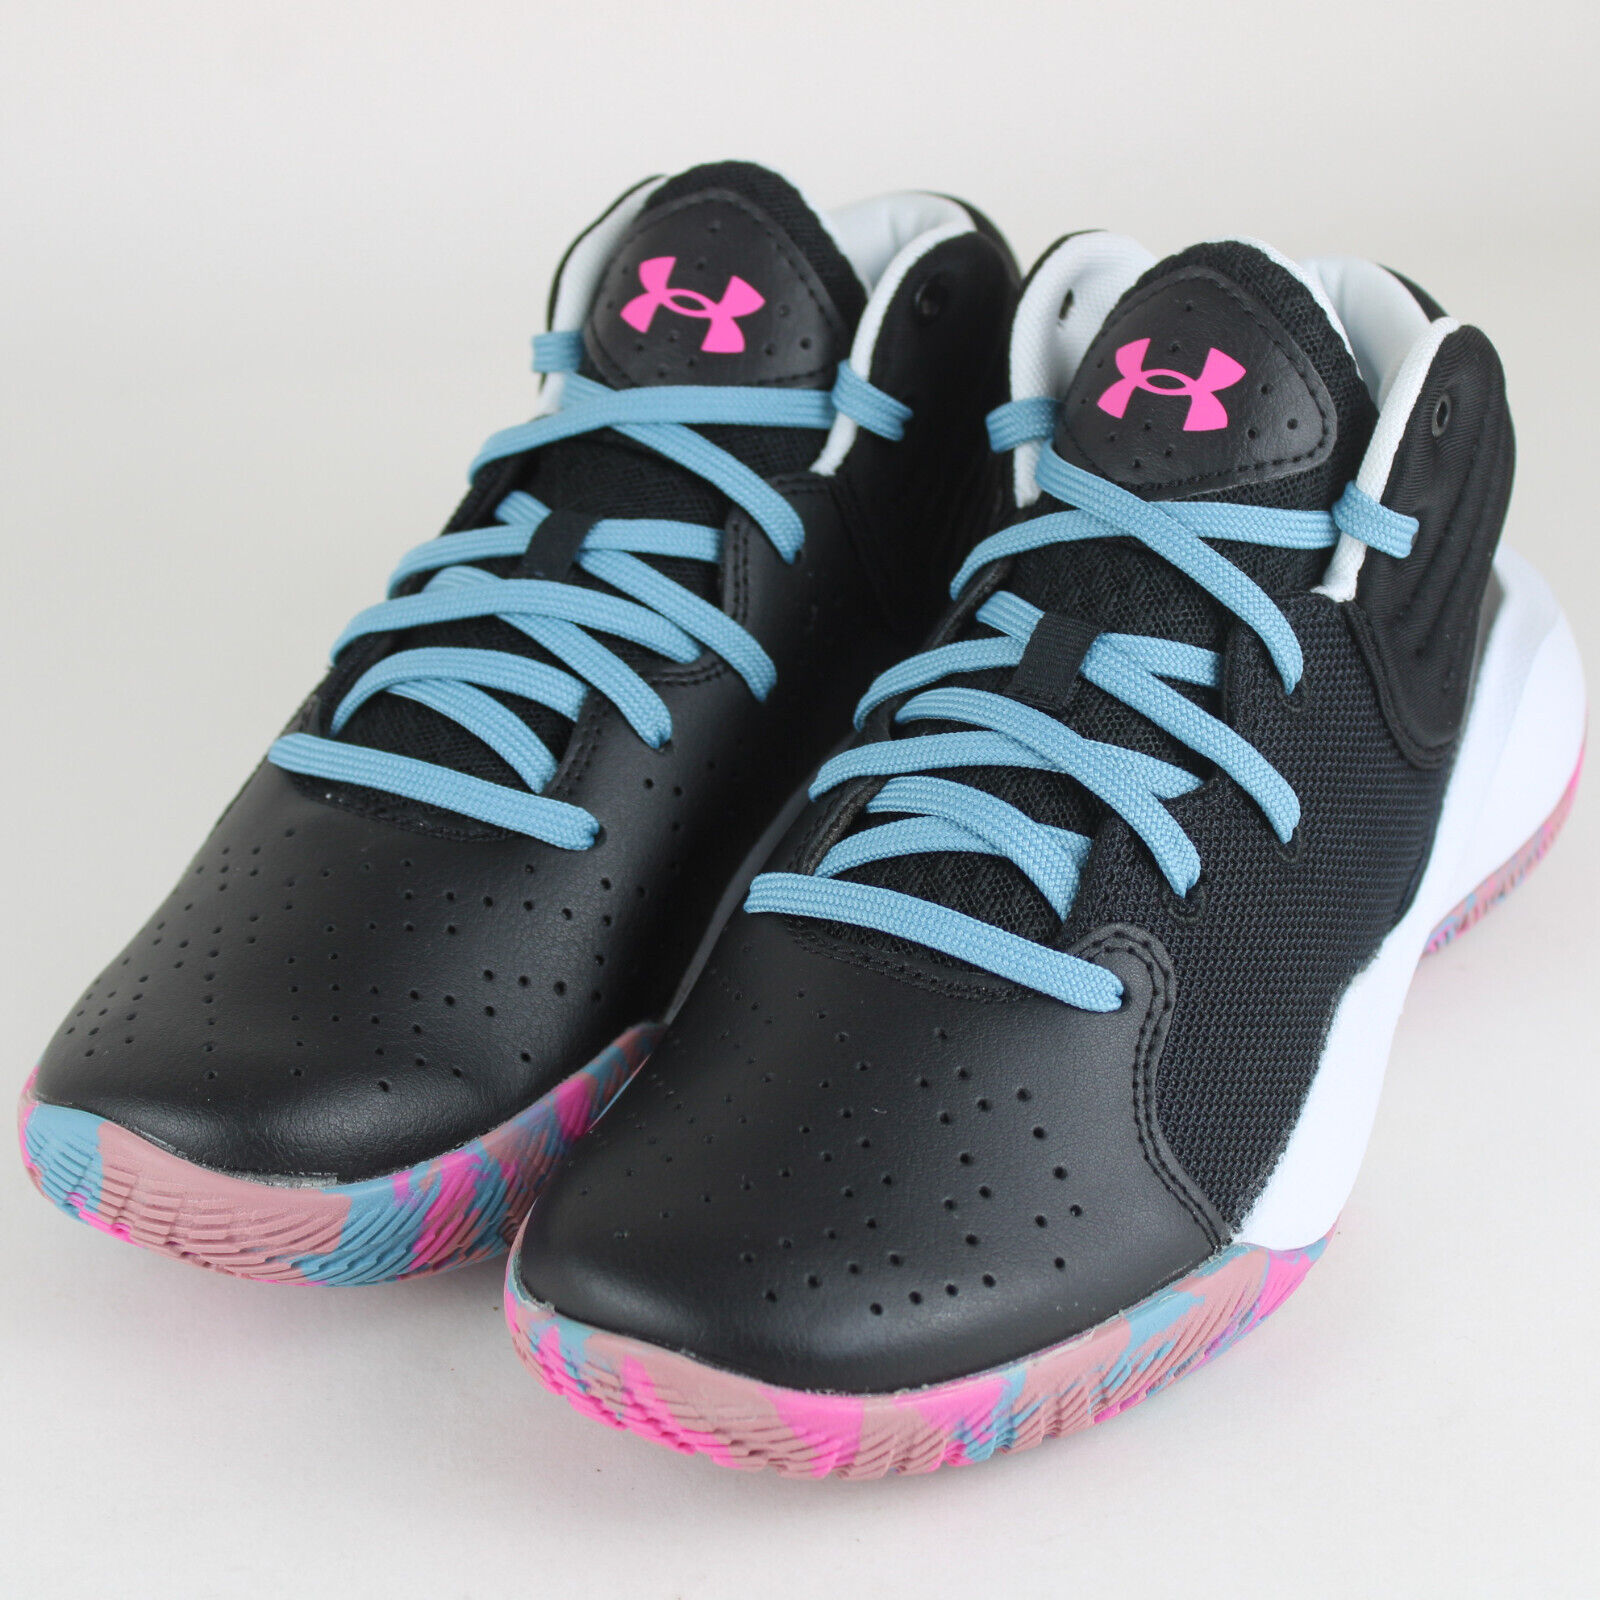 Beautiful Under Armour Kids Jet’s ’21 Athletic Basketball Shoes Black 3024794-007 on eBay